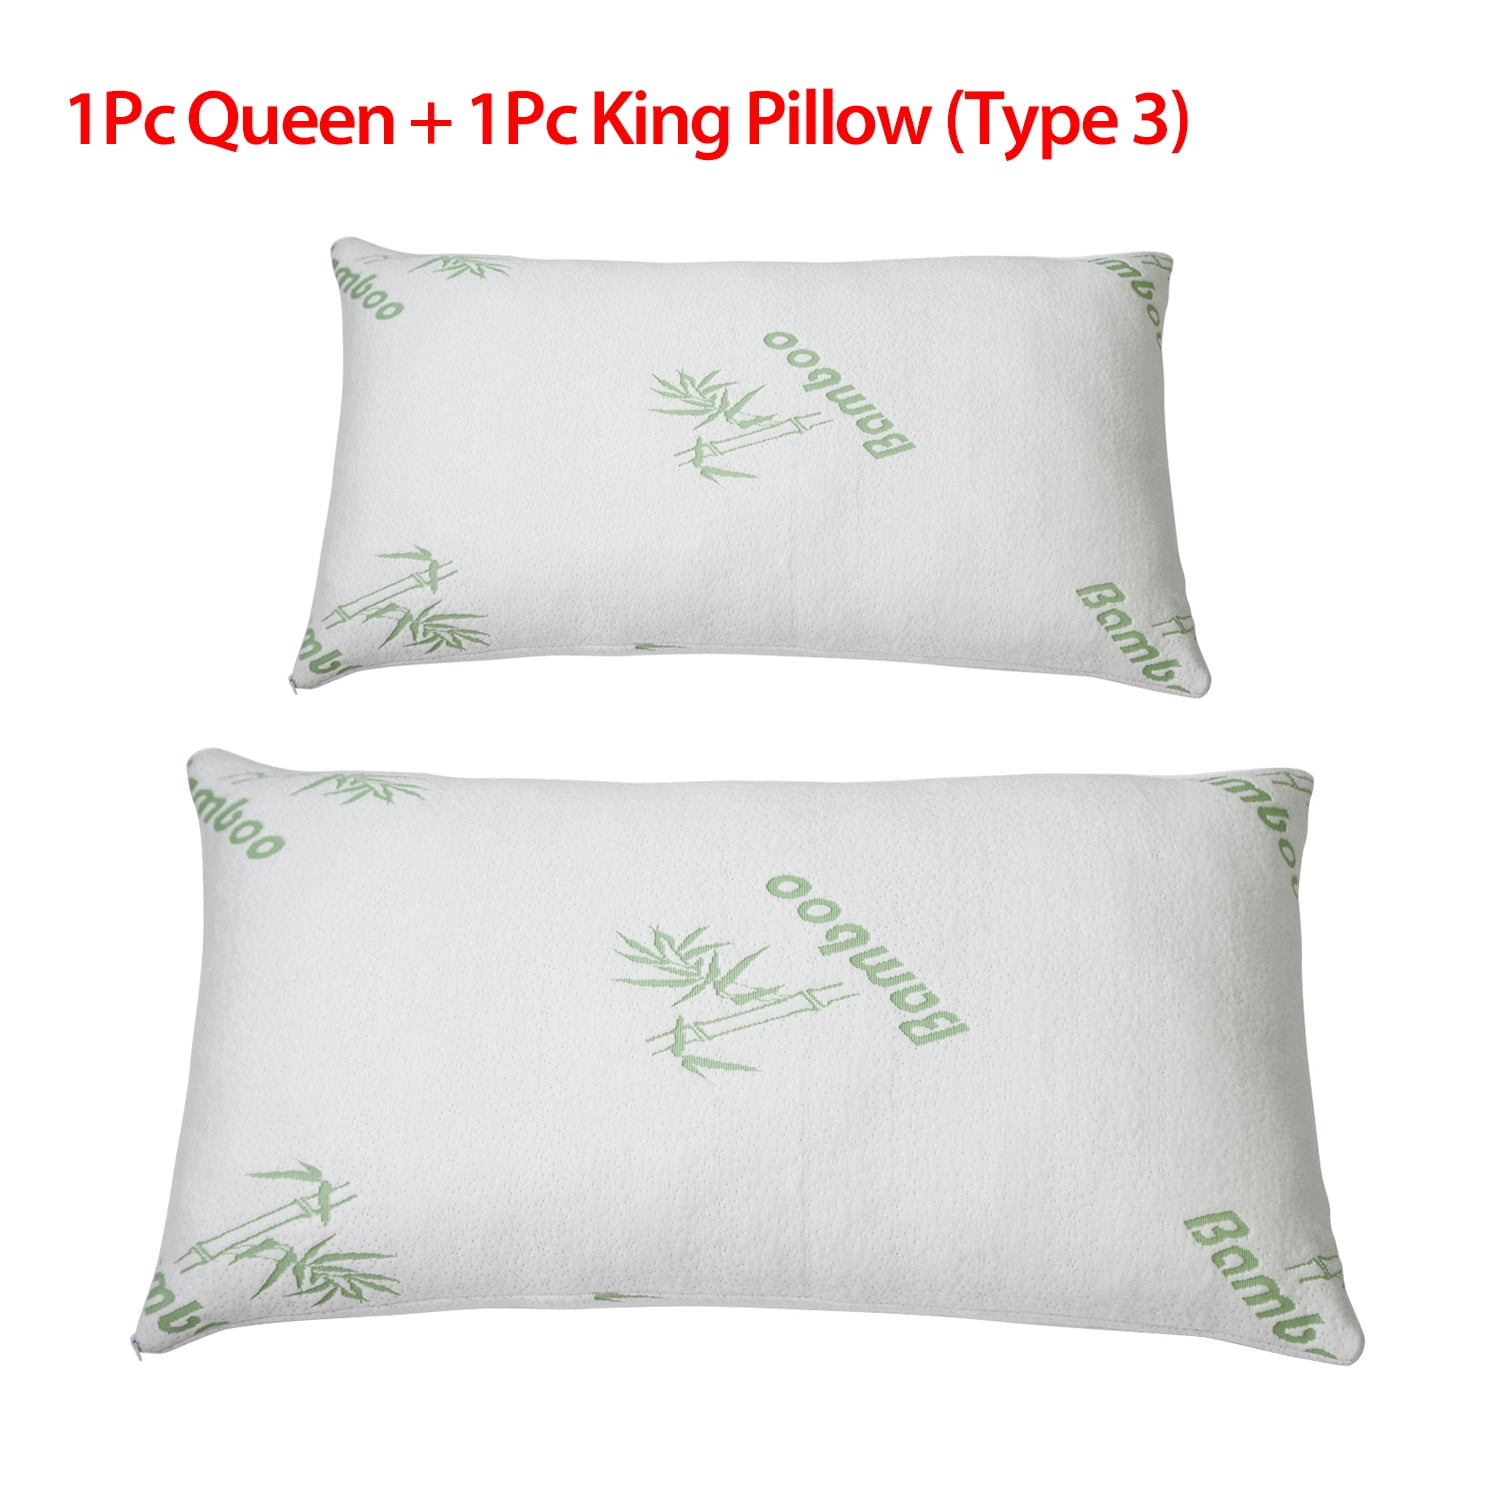 Bamboo Shredded Memory Foam Pillow with Hypoallergenic Cover Queen/King Size New 